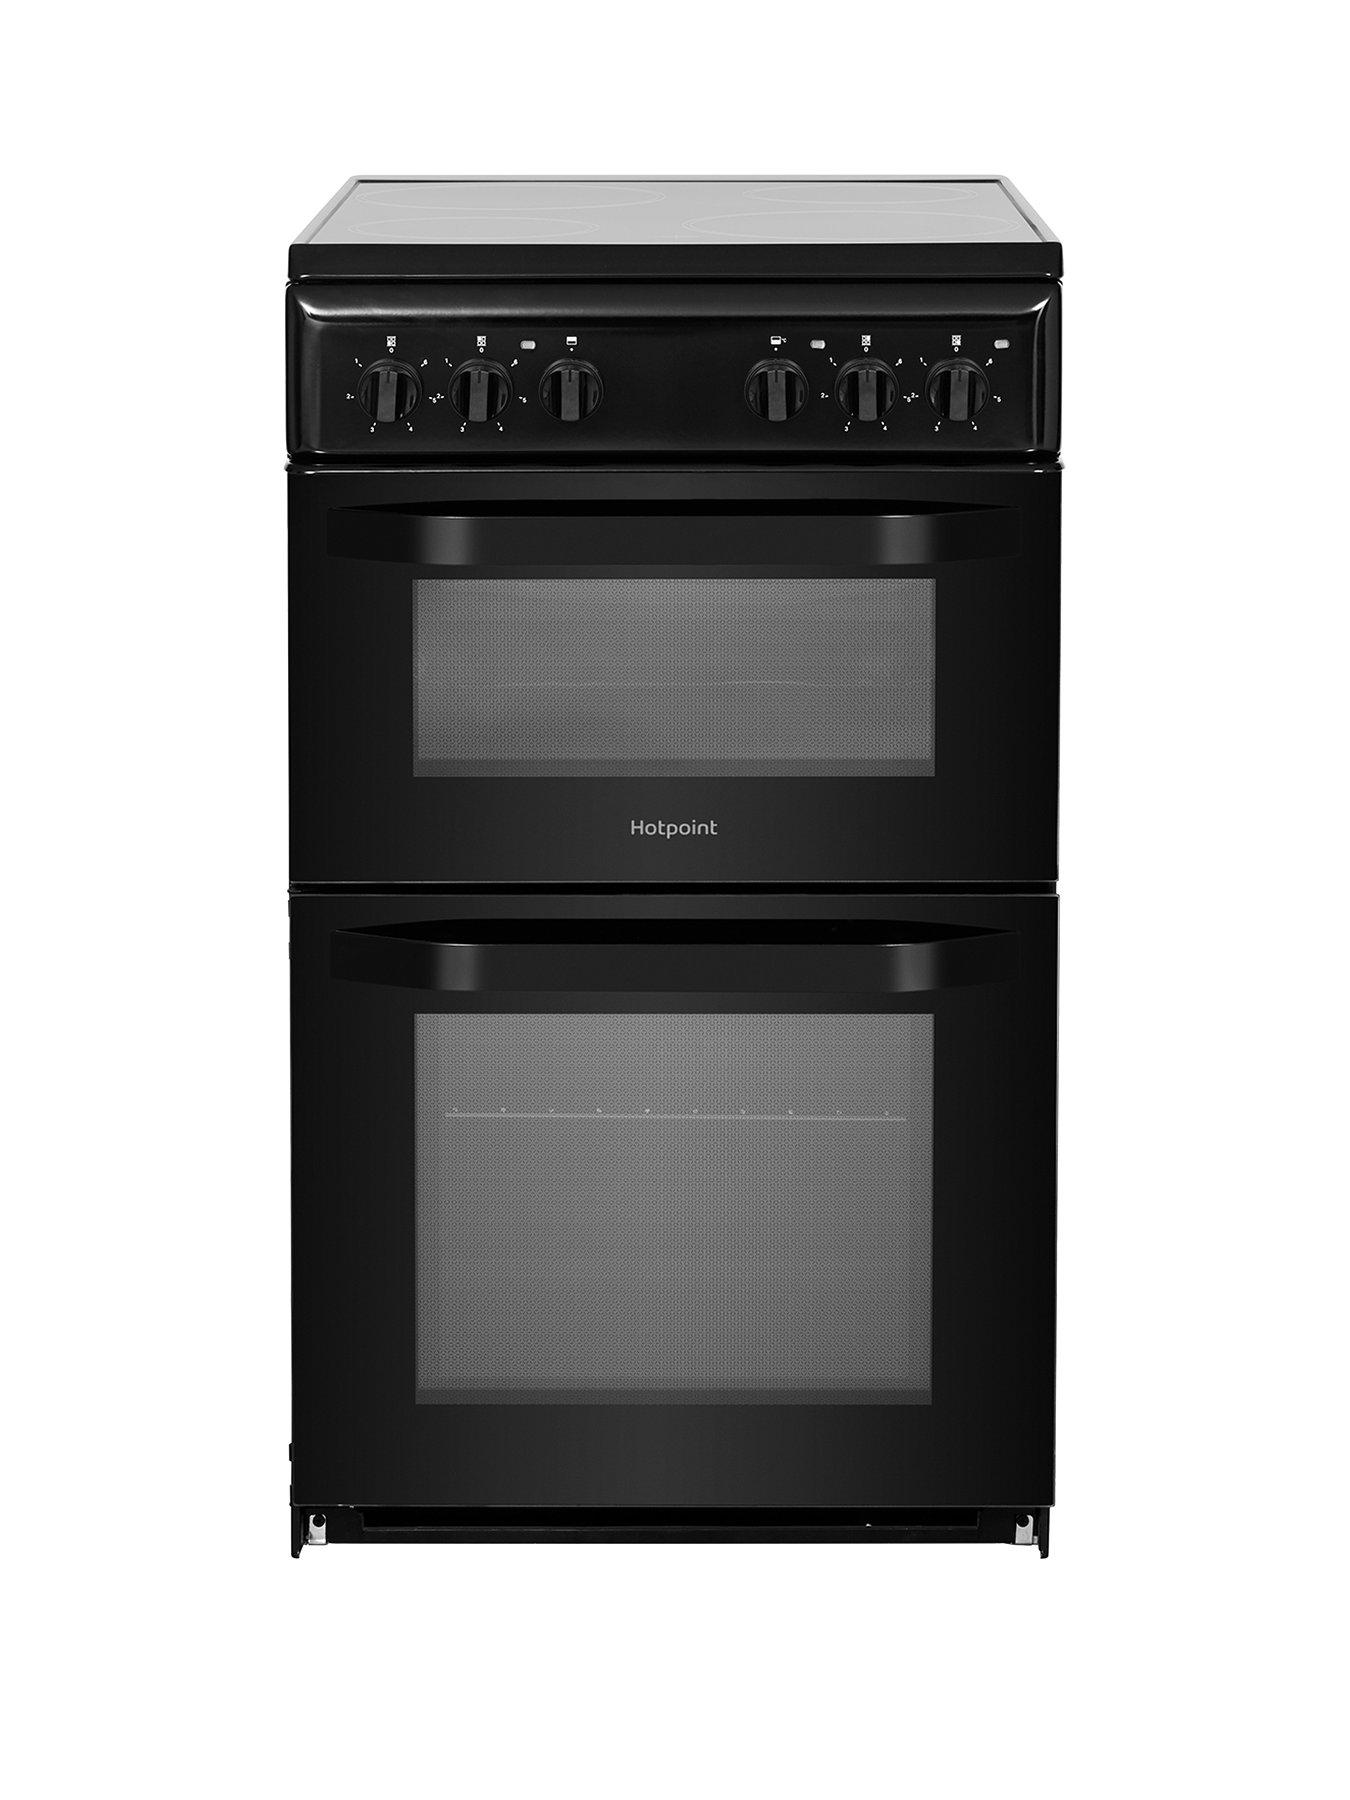 Hotpoint Hd5V92Kcb 50Cm Wide Electric Twin Cavity Single Oven Cooker - Black